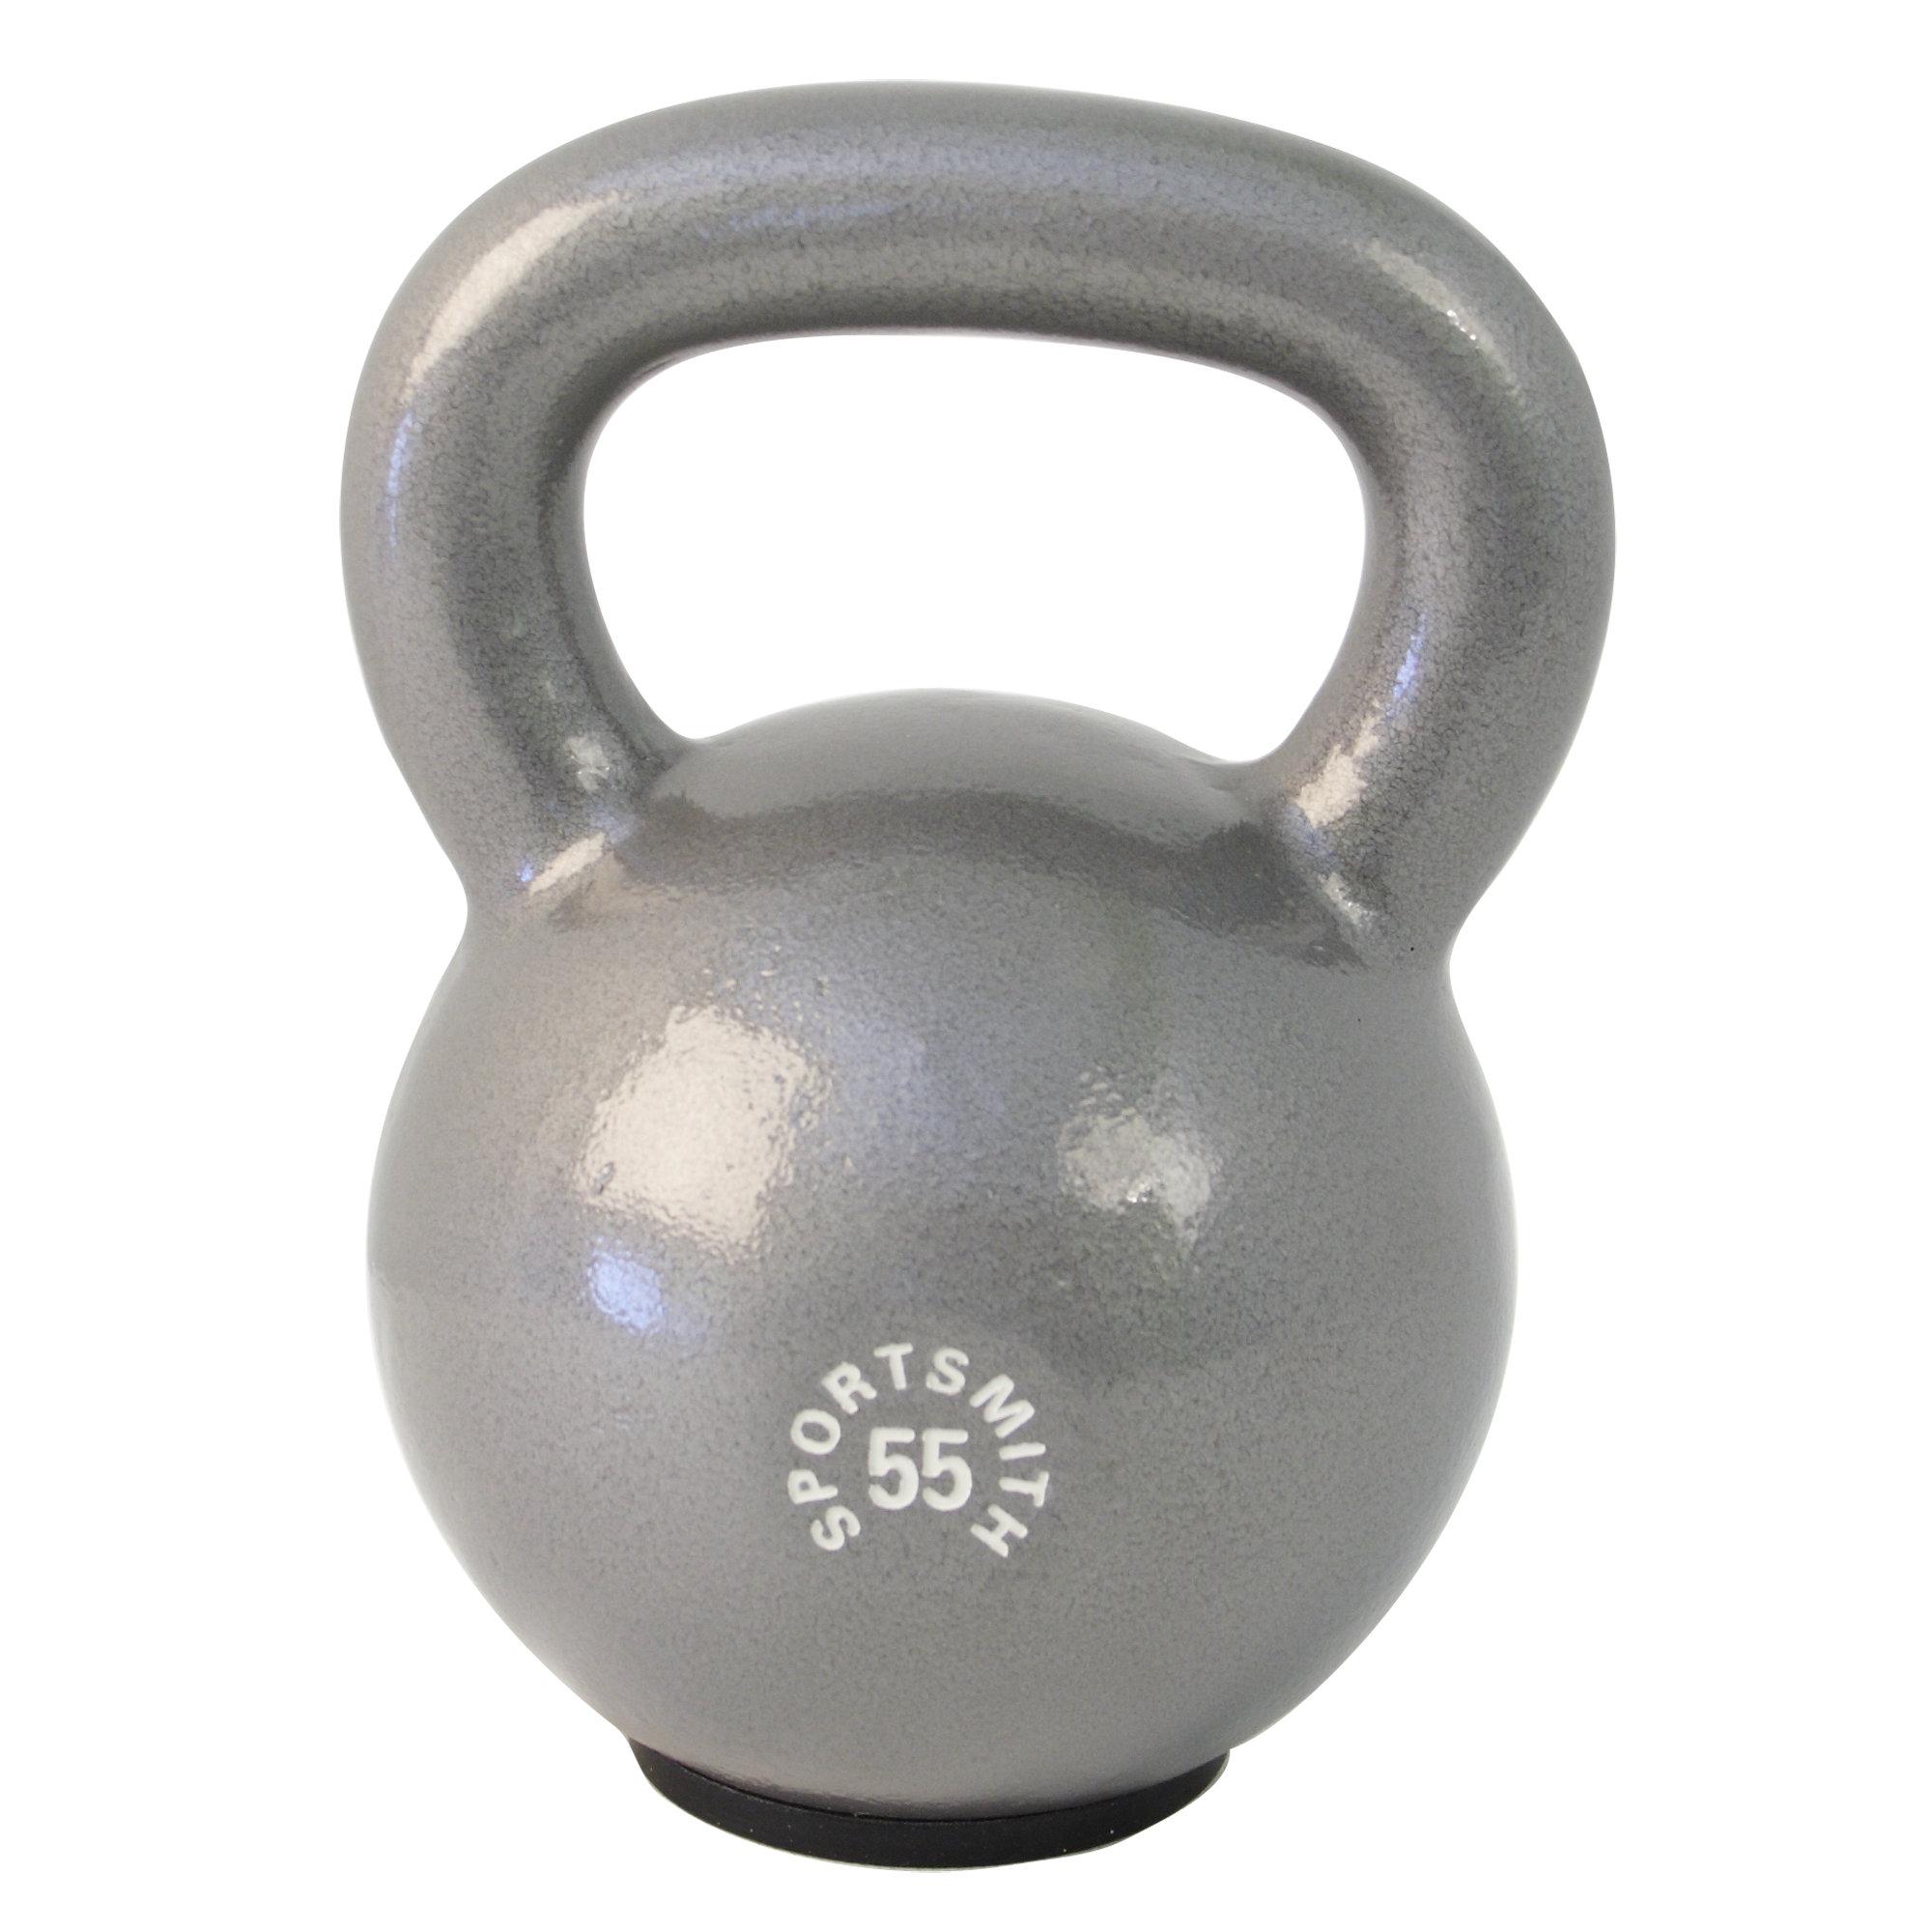 55 Lb. Kettlebell with Rubber Base, Cast Iron, Gray